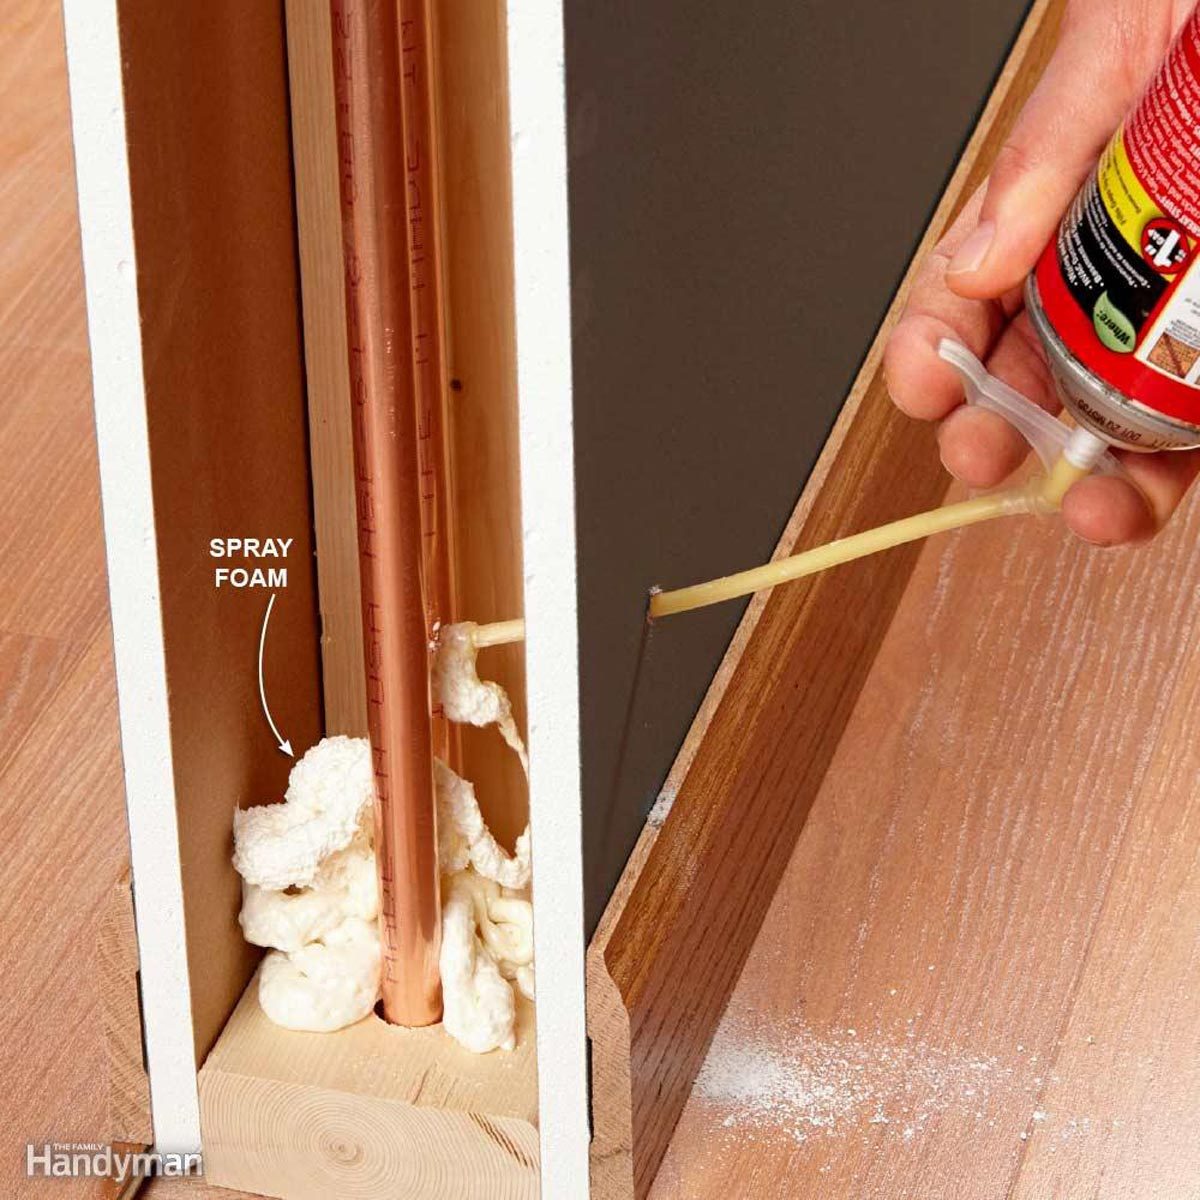 Foam gap filler is a quick fix for cracks and holes in the RV - RV Travel